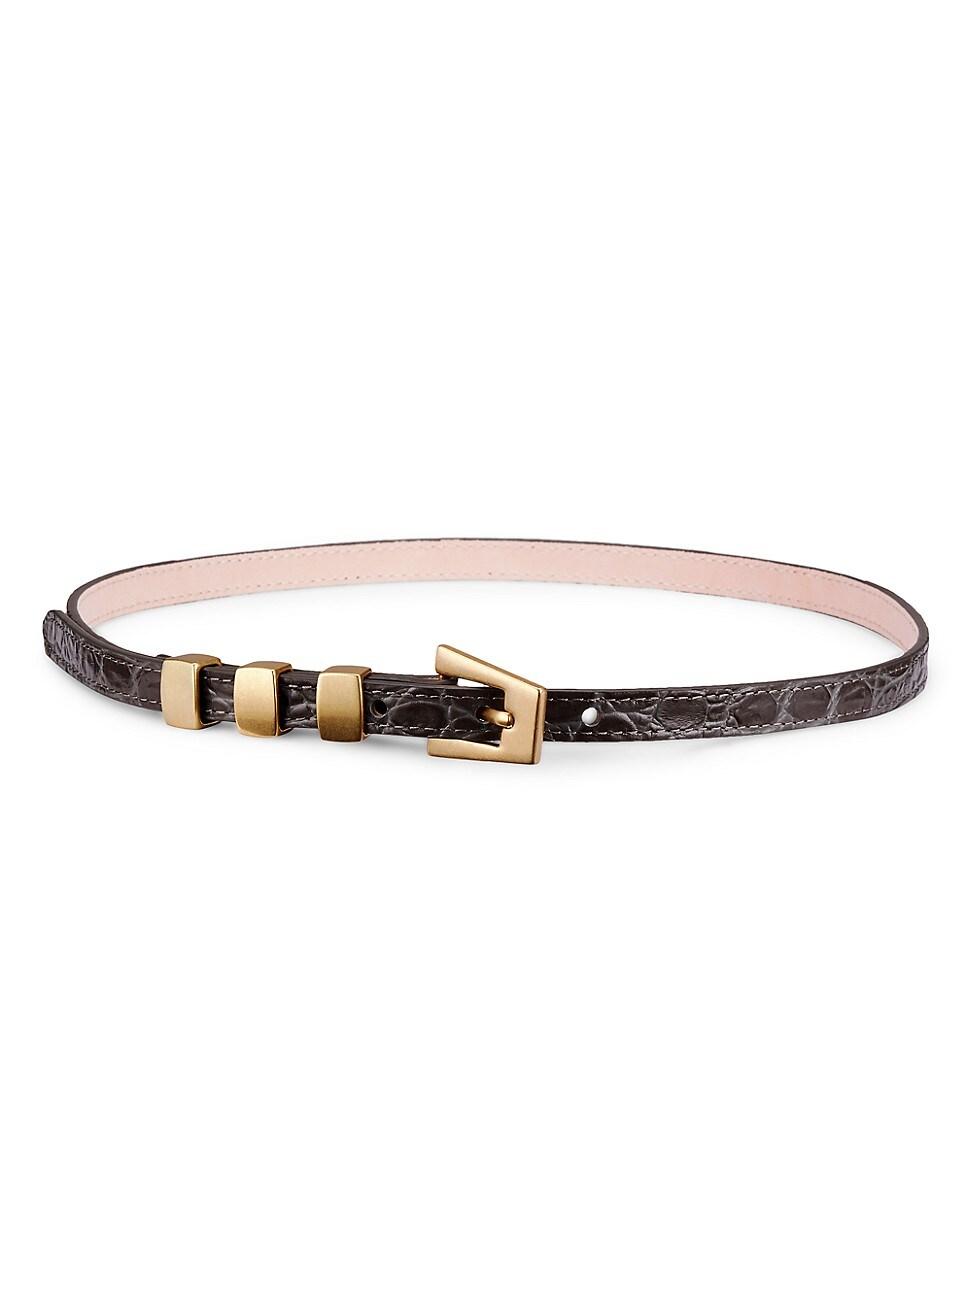 BY FAR Vic Cement Circular Croc-embossed Leather Belt in White | Lyst